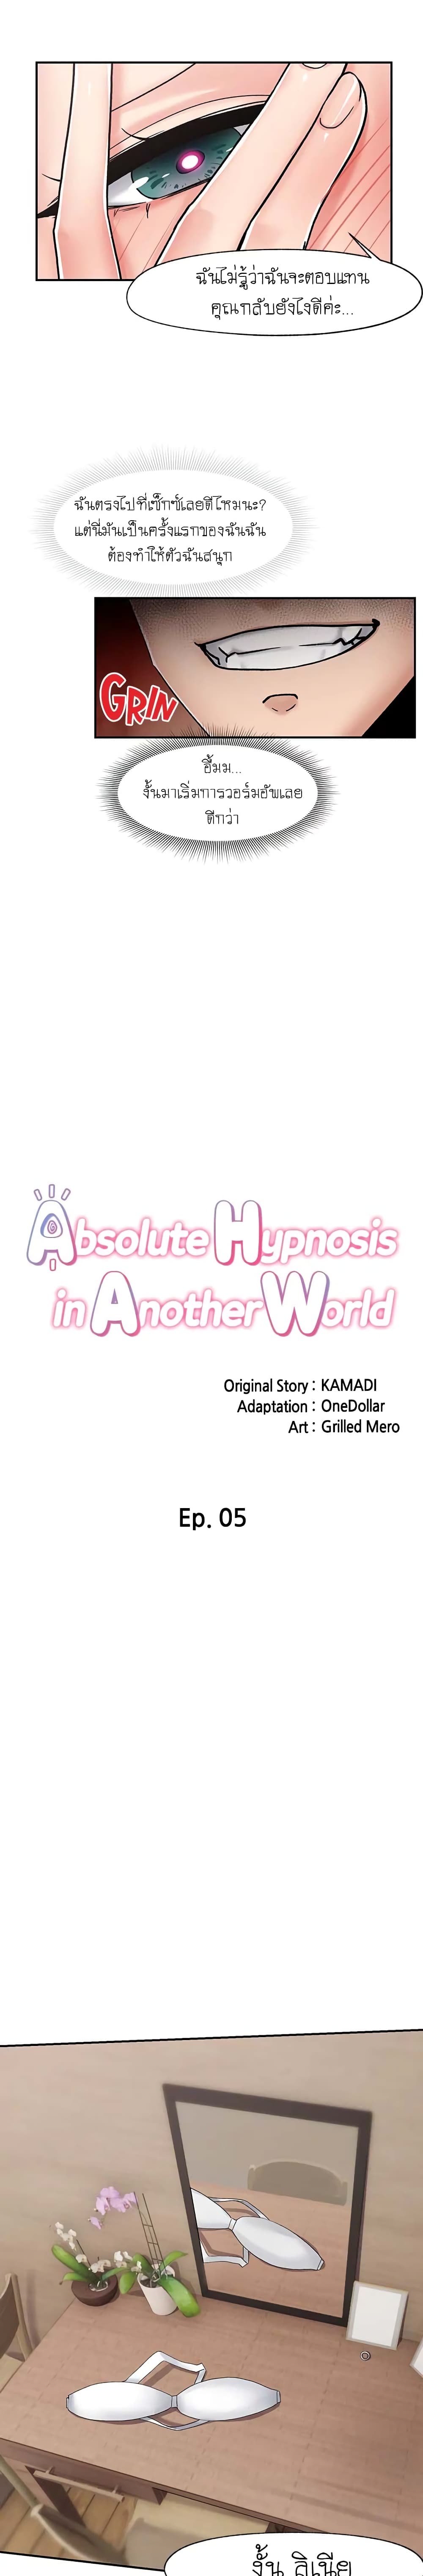 Absolute Hypnosis in Another World 5 (5)